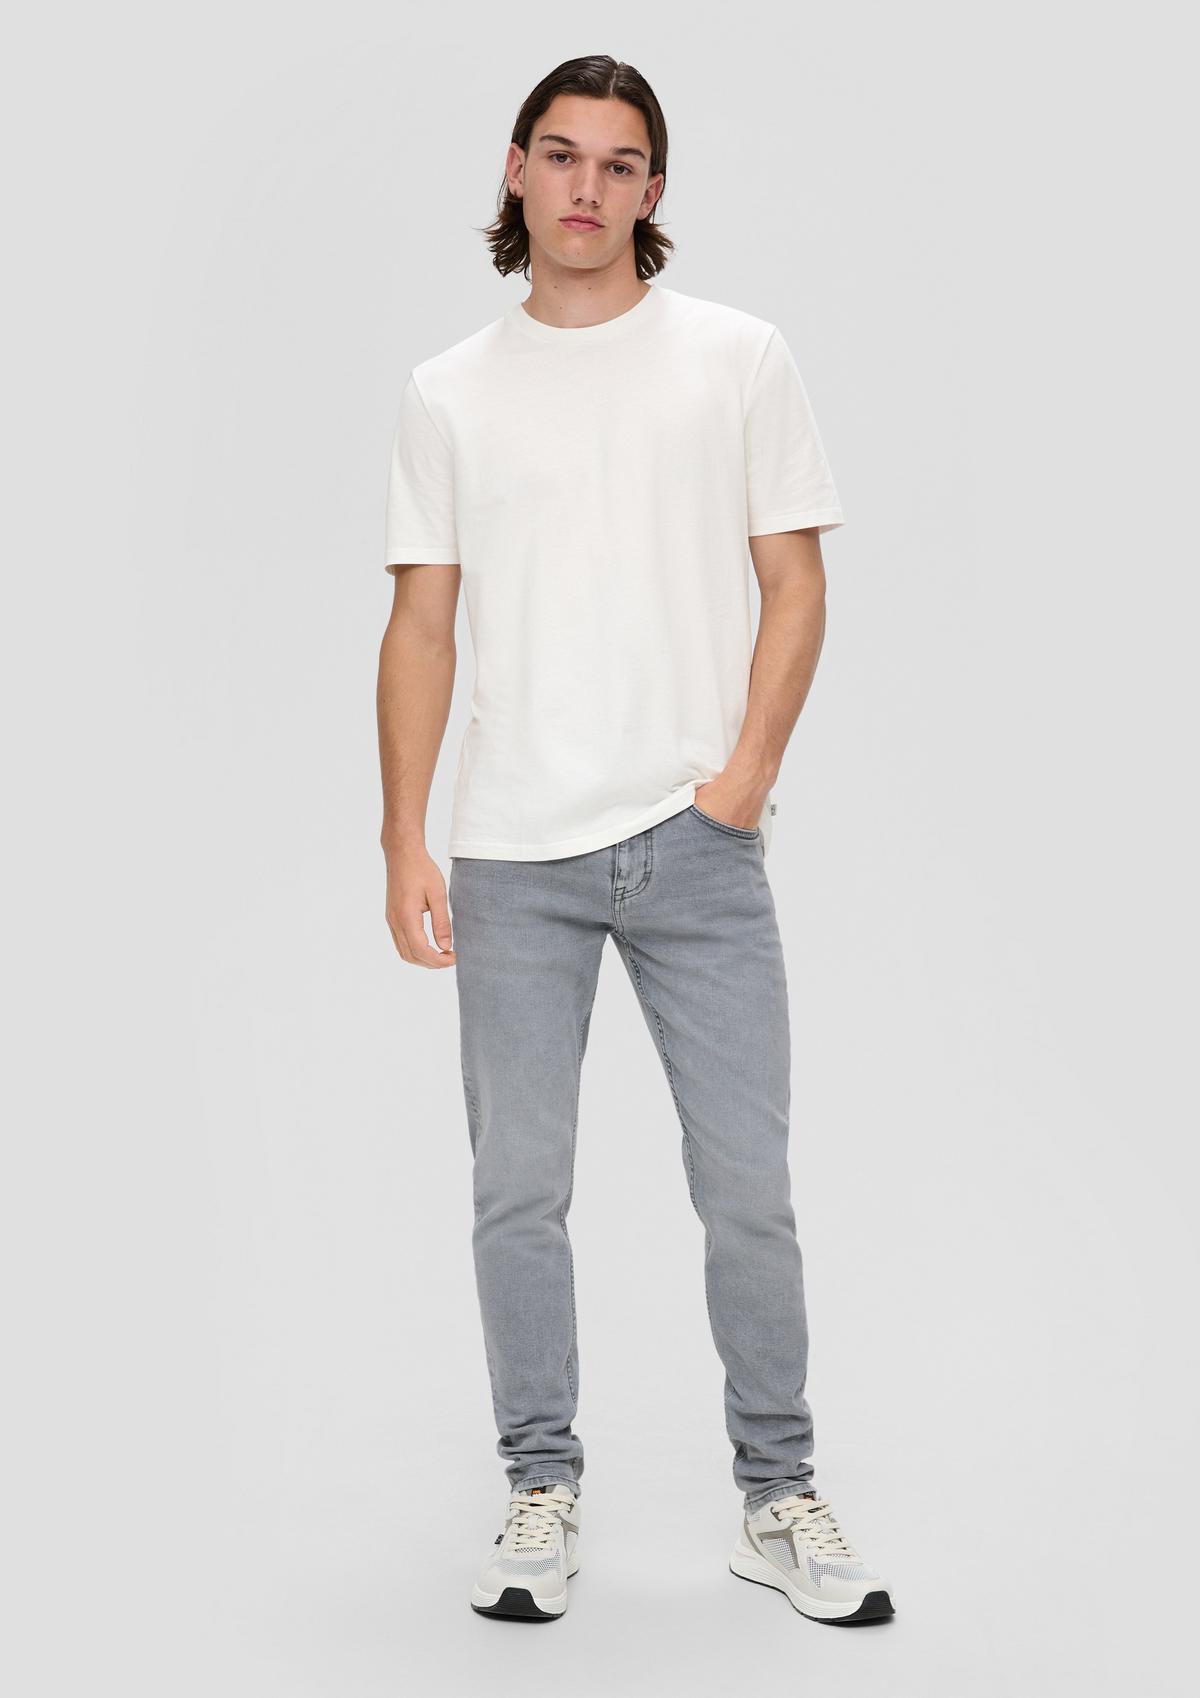 Jeans Shawn / Regular Fit / Mid Rise / Tapered Leg